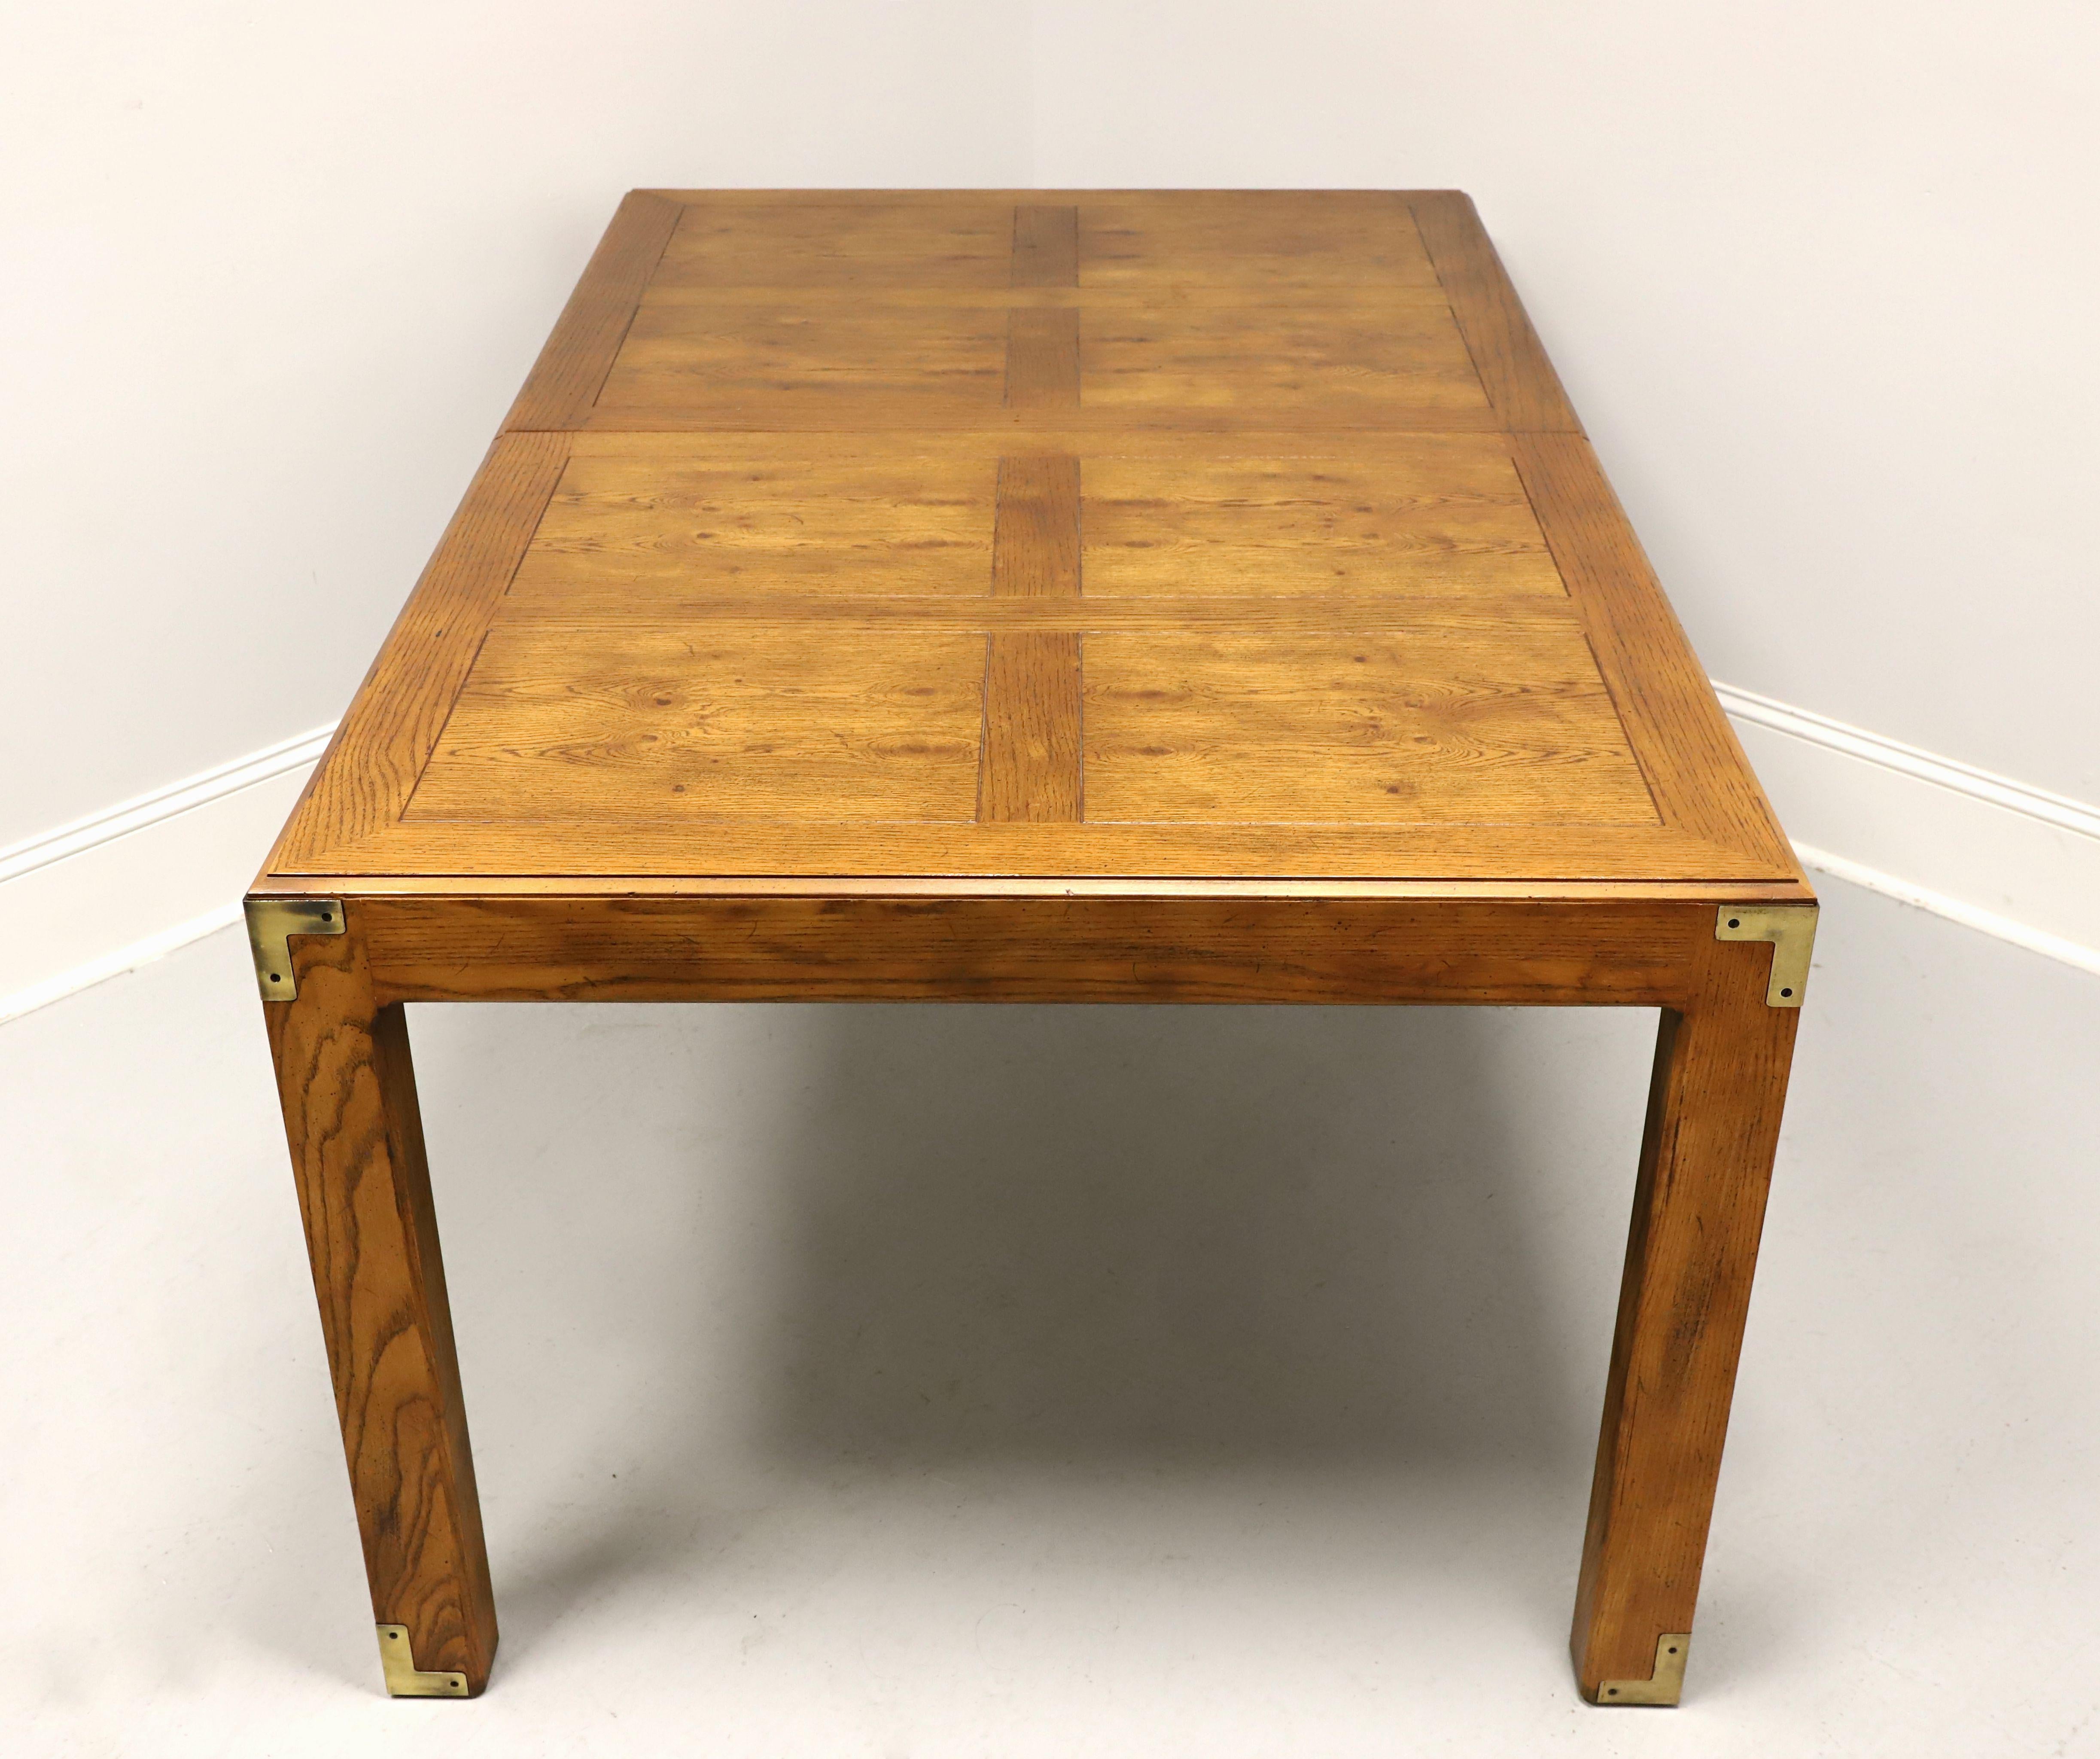 A campaign style dining table by Henredon, from their Artefacts Collection. Knotty oak with a slightly distressed finish, banded beveled edge top with a parquetry pattern, brass accents to corners & feet, full apron, and square straight legs.